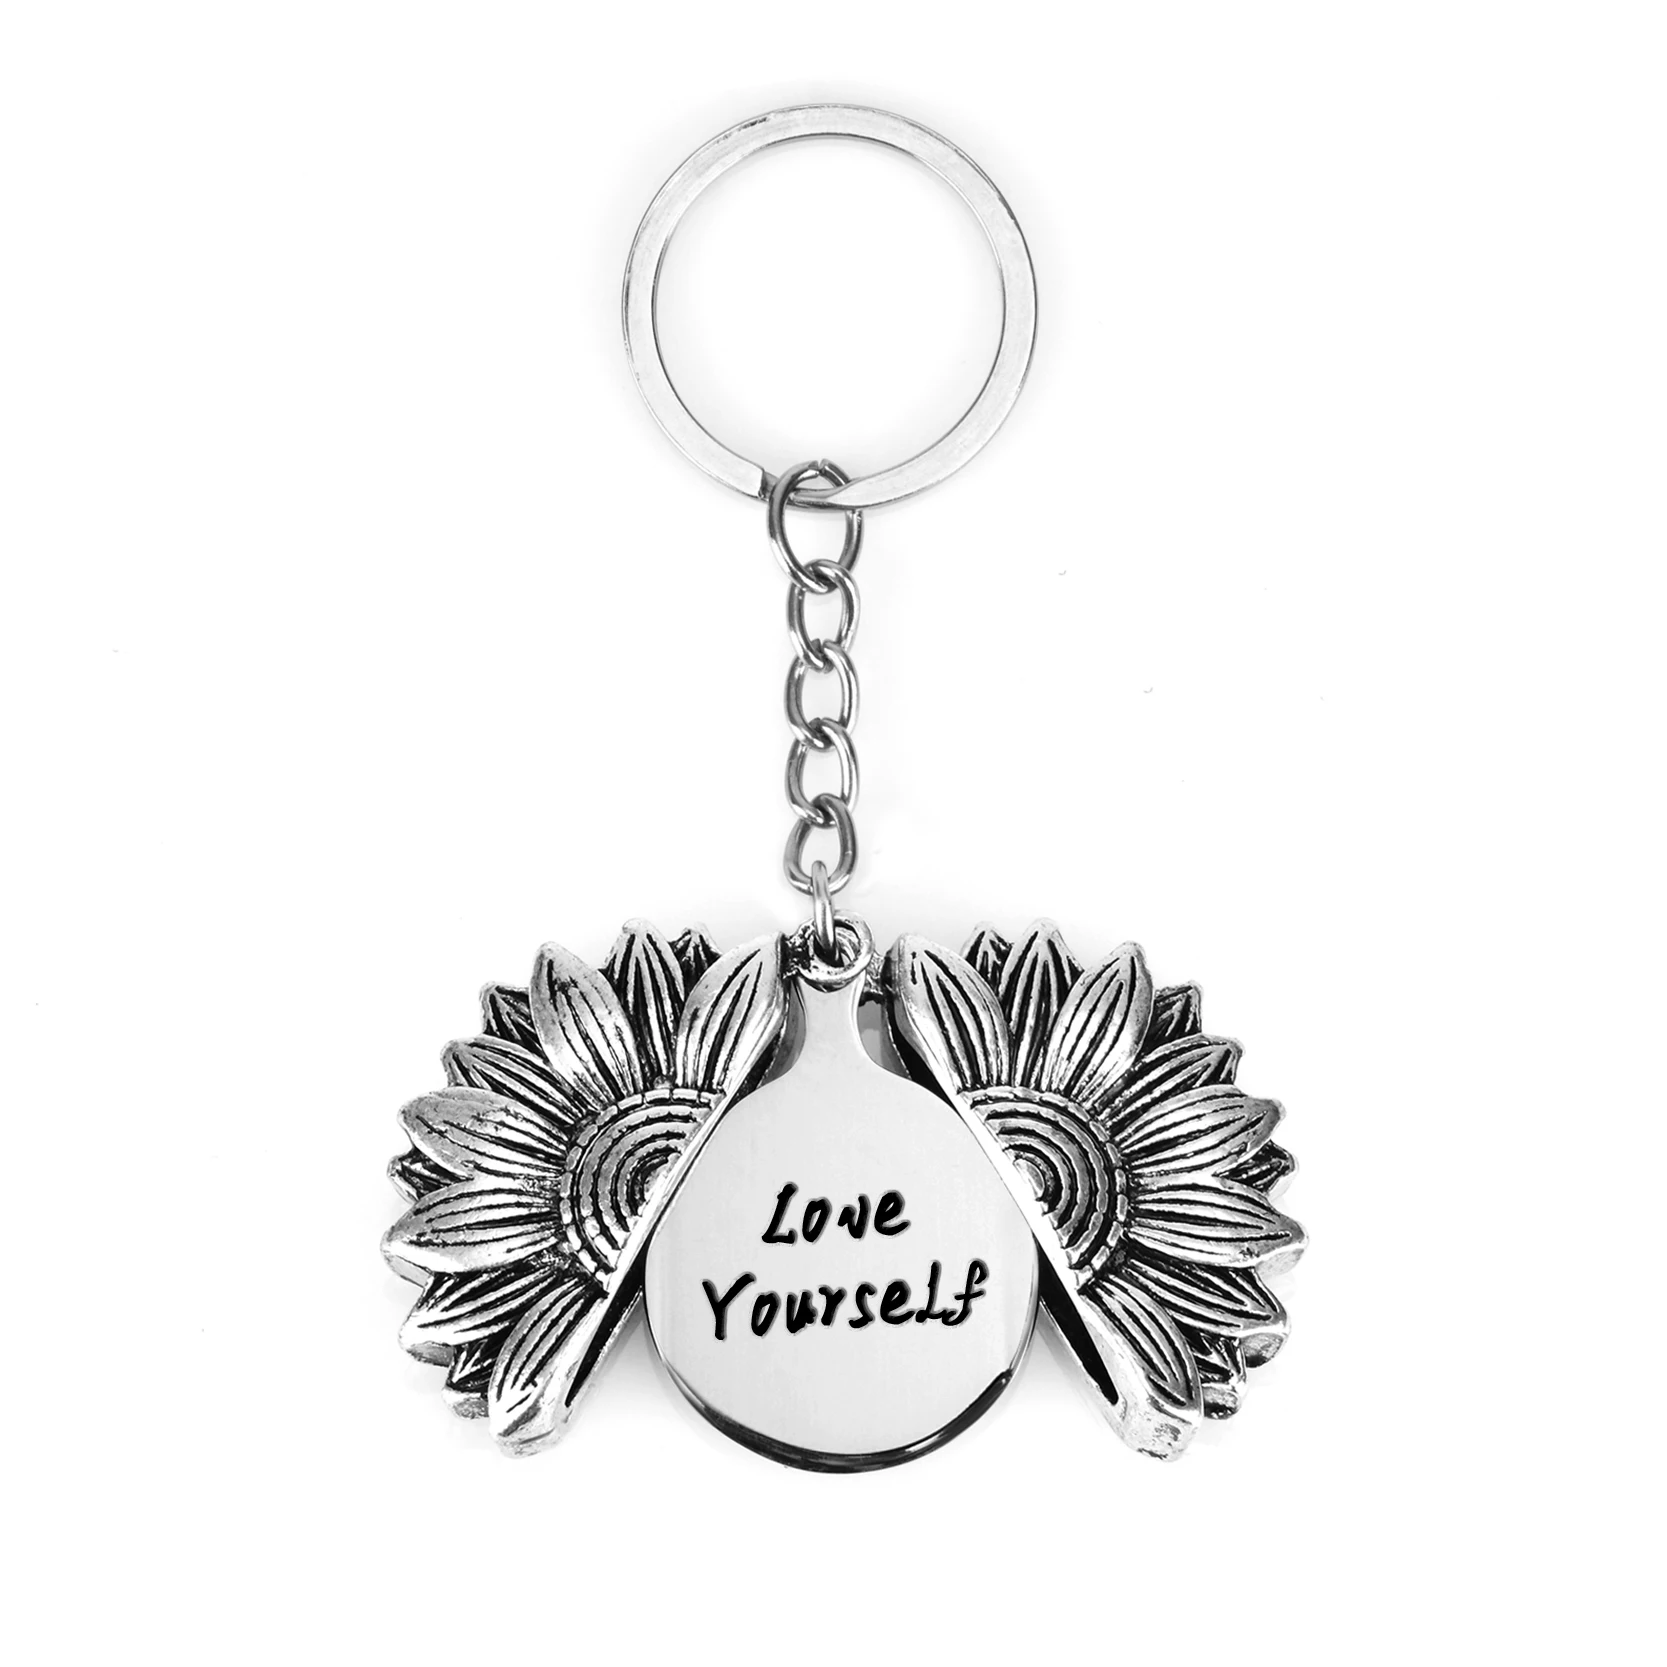 New Style Sunflower Keychain Follow Your Bliss Engraved Lettering Key Chain Men Women Couples Boyfriend Anniversary Gift Jewelry